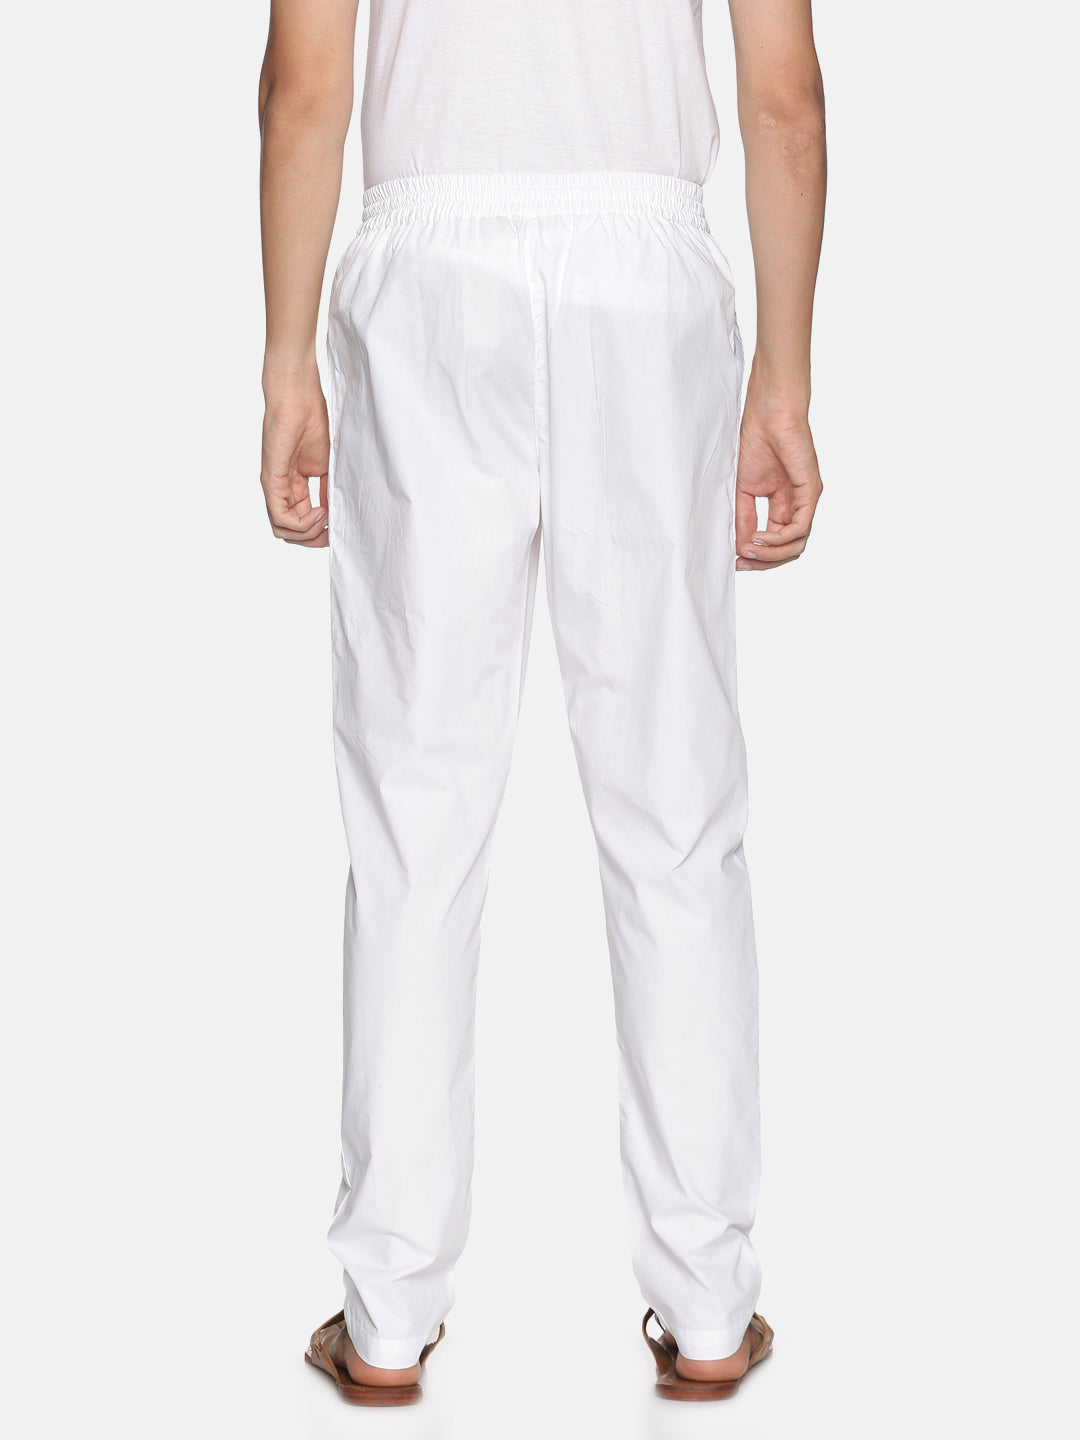 Pack of 2 White & Black Cotton Trousers with Drawstring